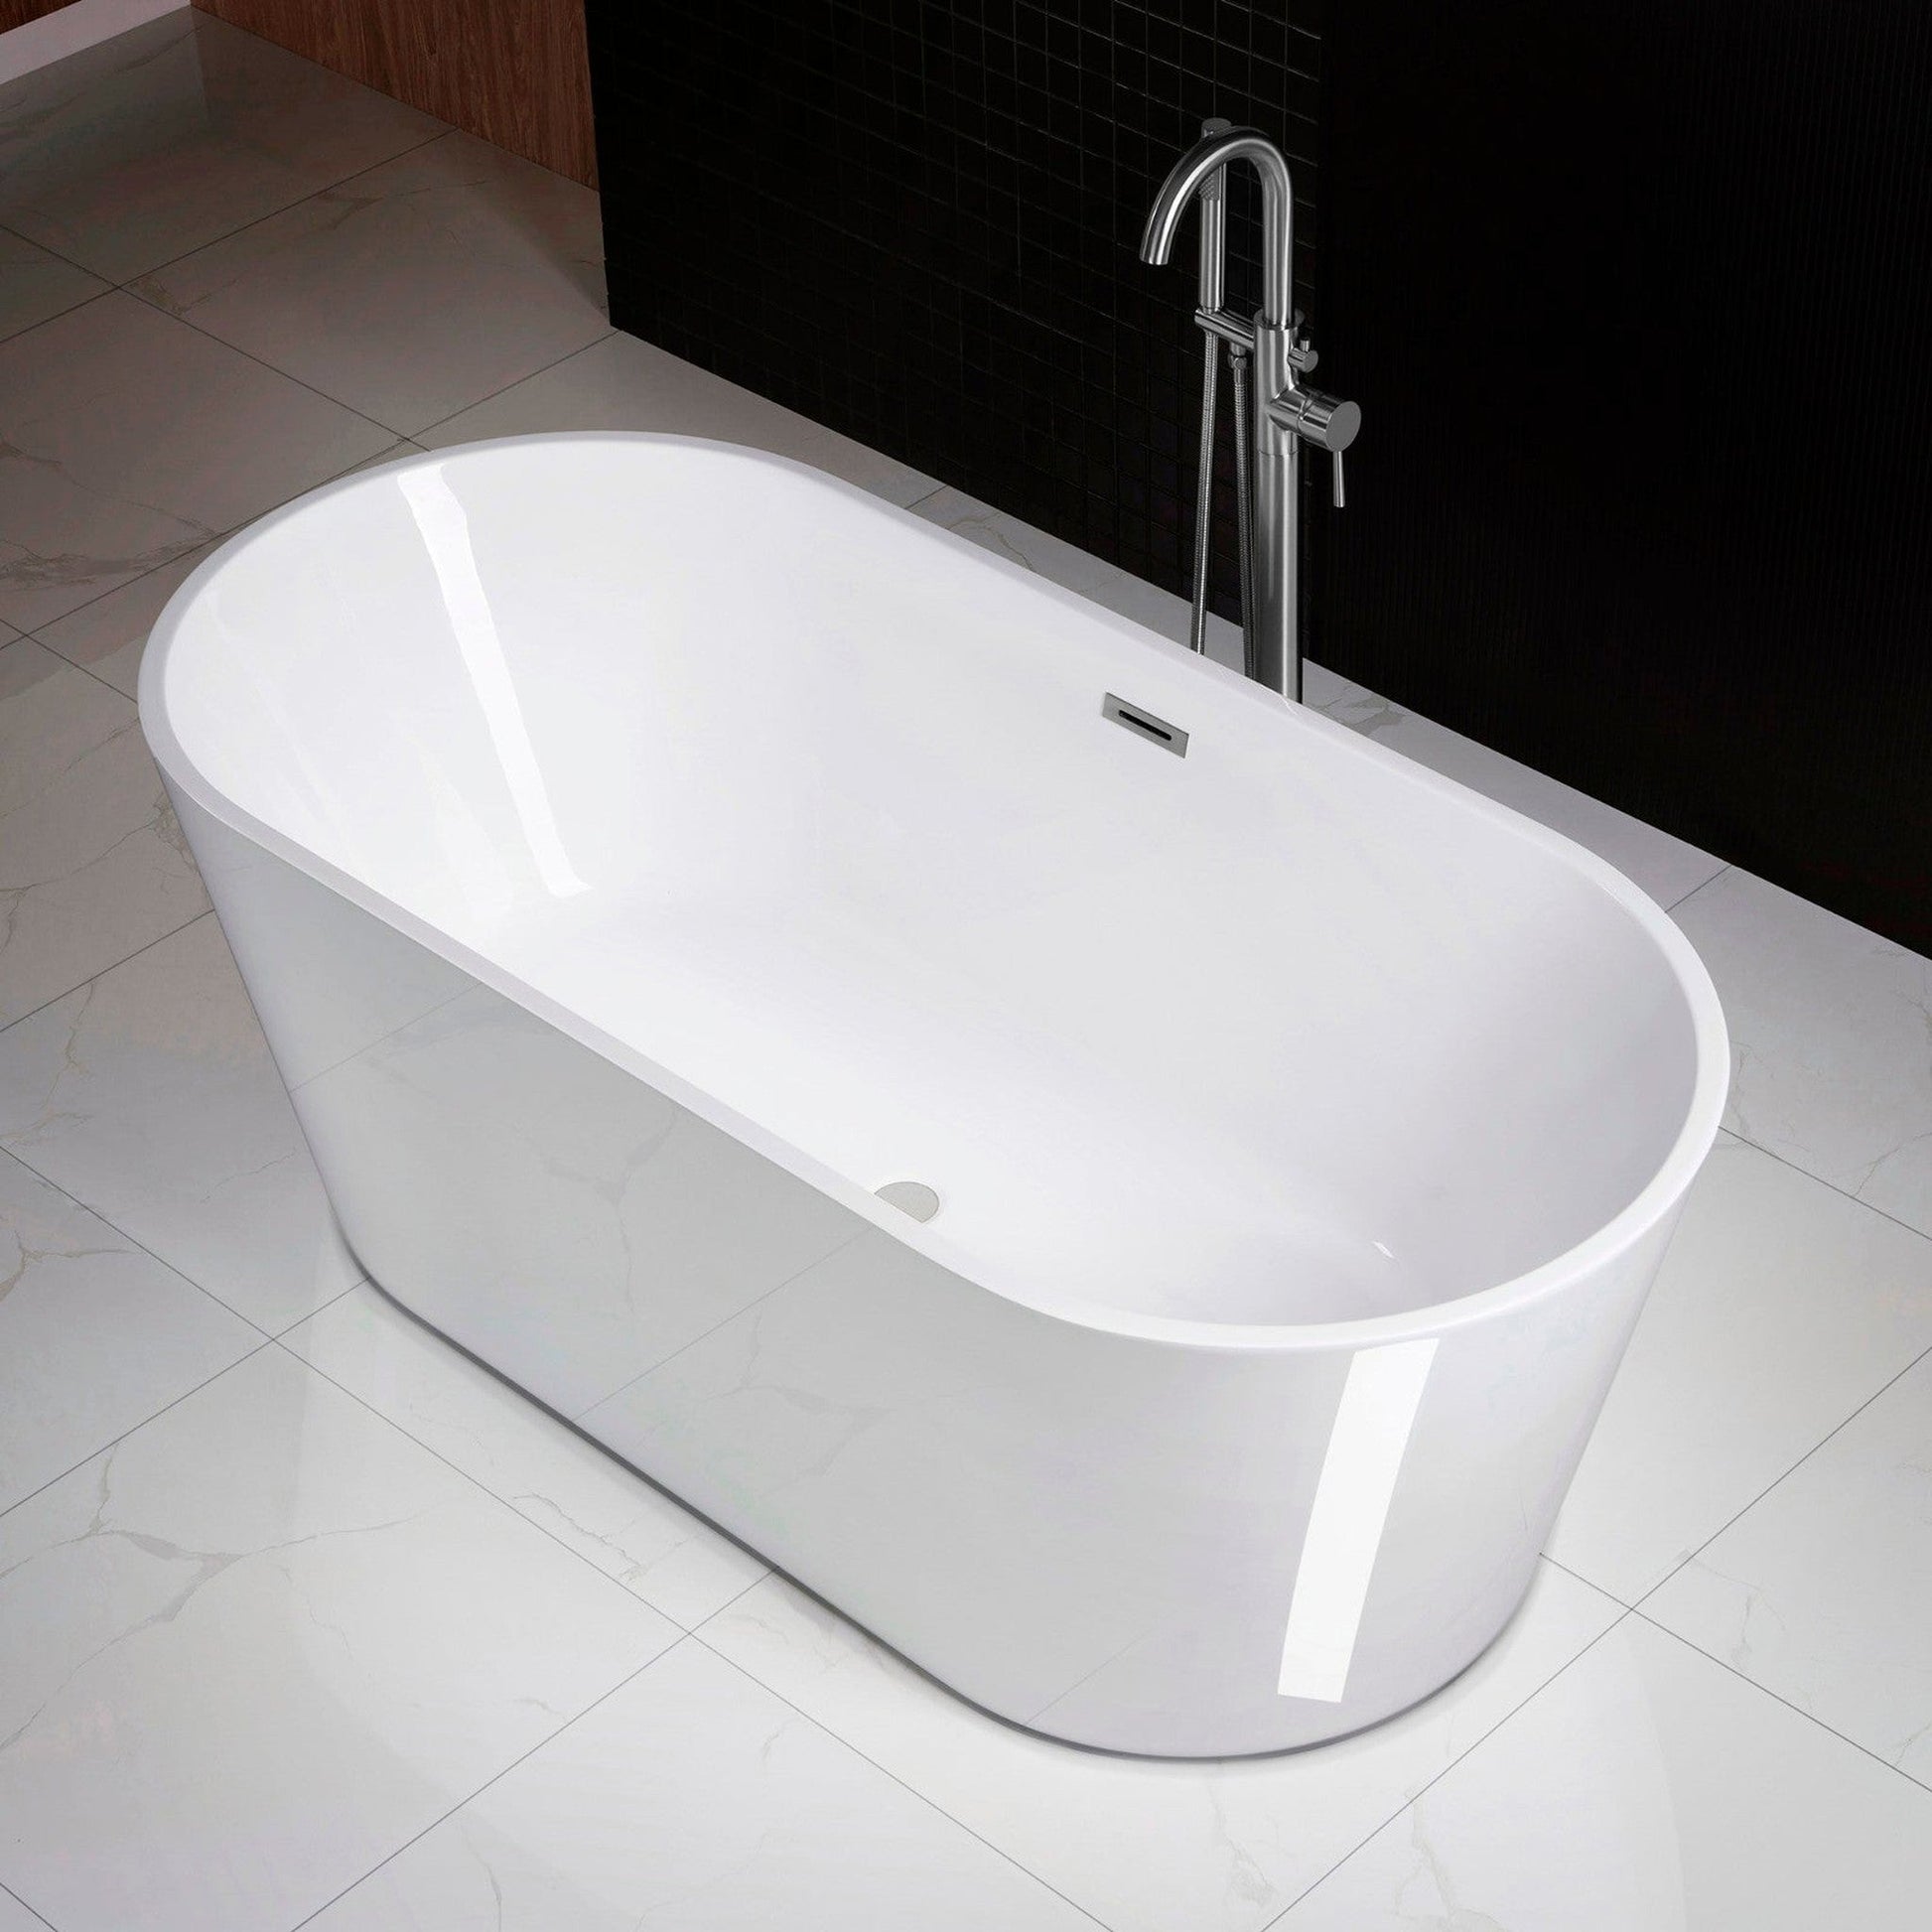 WoodBridge 71" White Acrylic Freestanding Contemporary Soaking Bathtub With Chrome Drain, Overflow, F0024CHRD Tub Filler and Caddy Tray